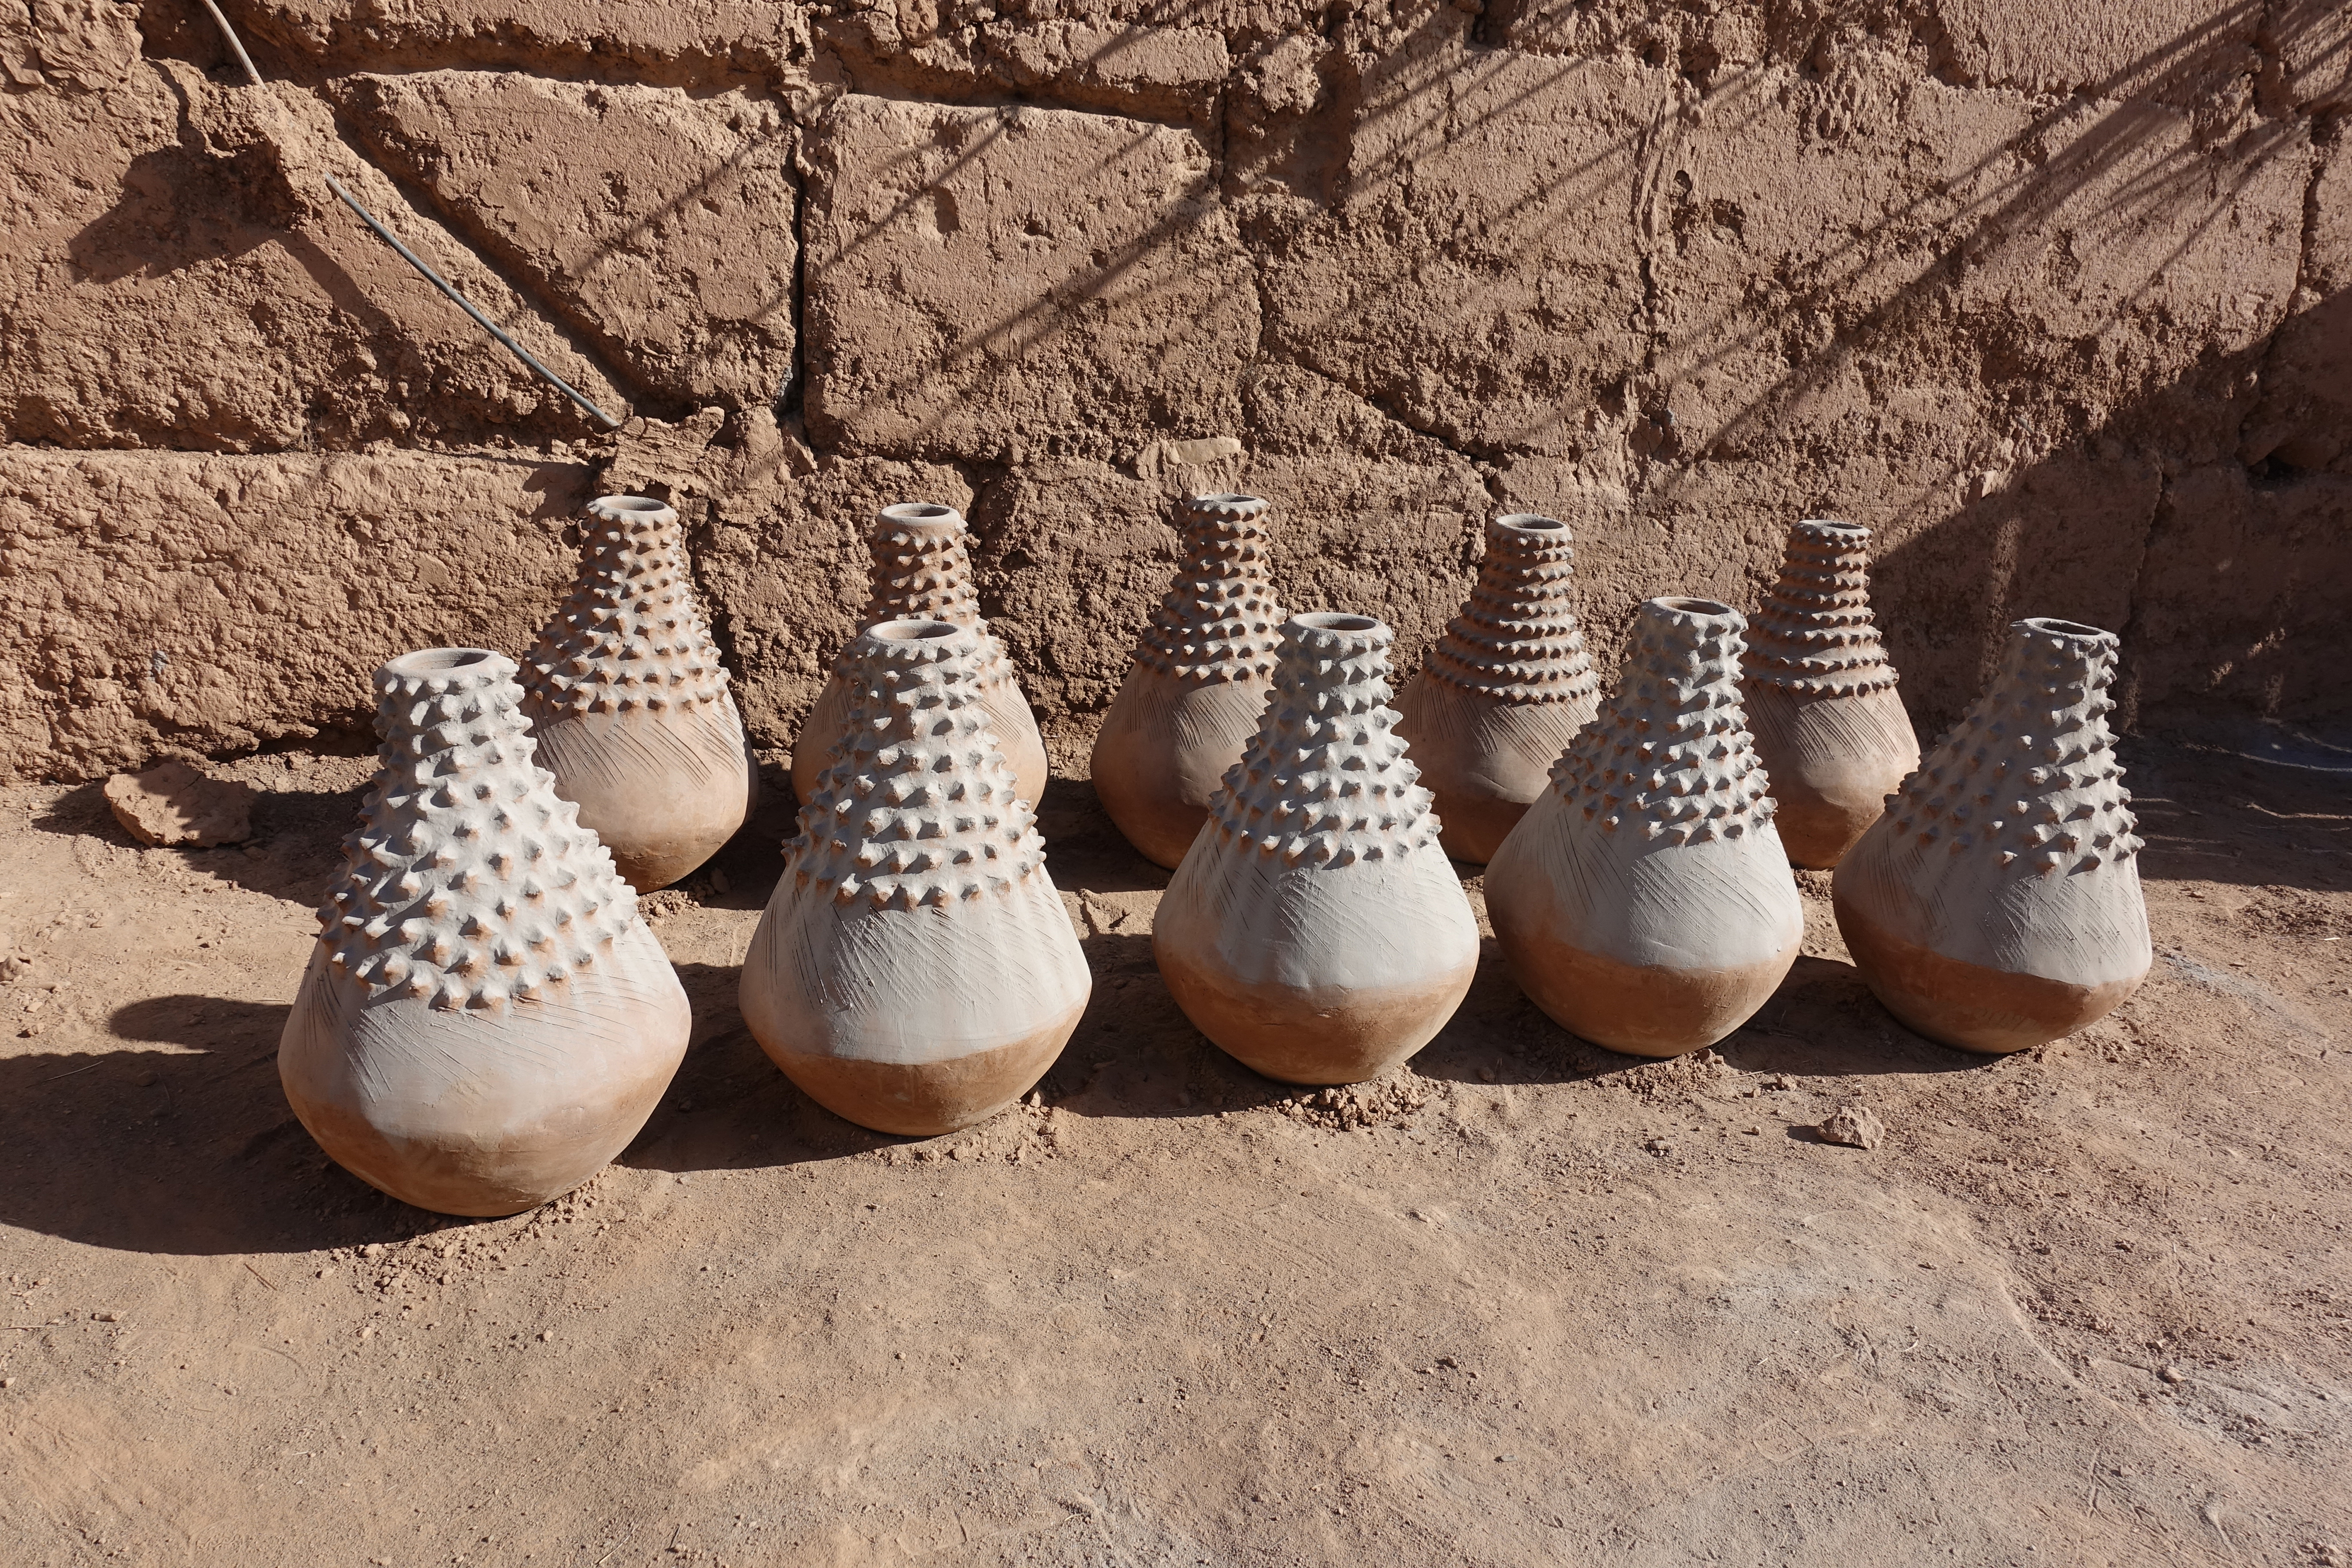 Astour, near Zagora, Oasis region. These unique pieces, nearly 30” high, were commissioned by someone in a big city as decorative pieces in a hotel or mall. The white coating is ash from the fire pit.